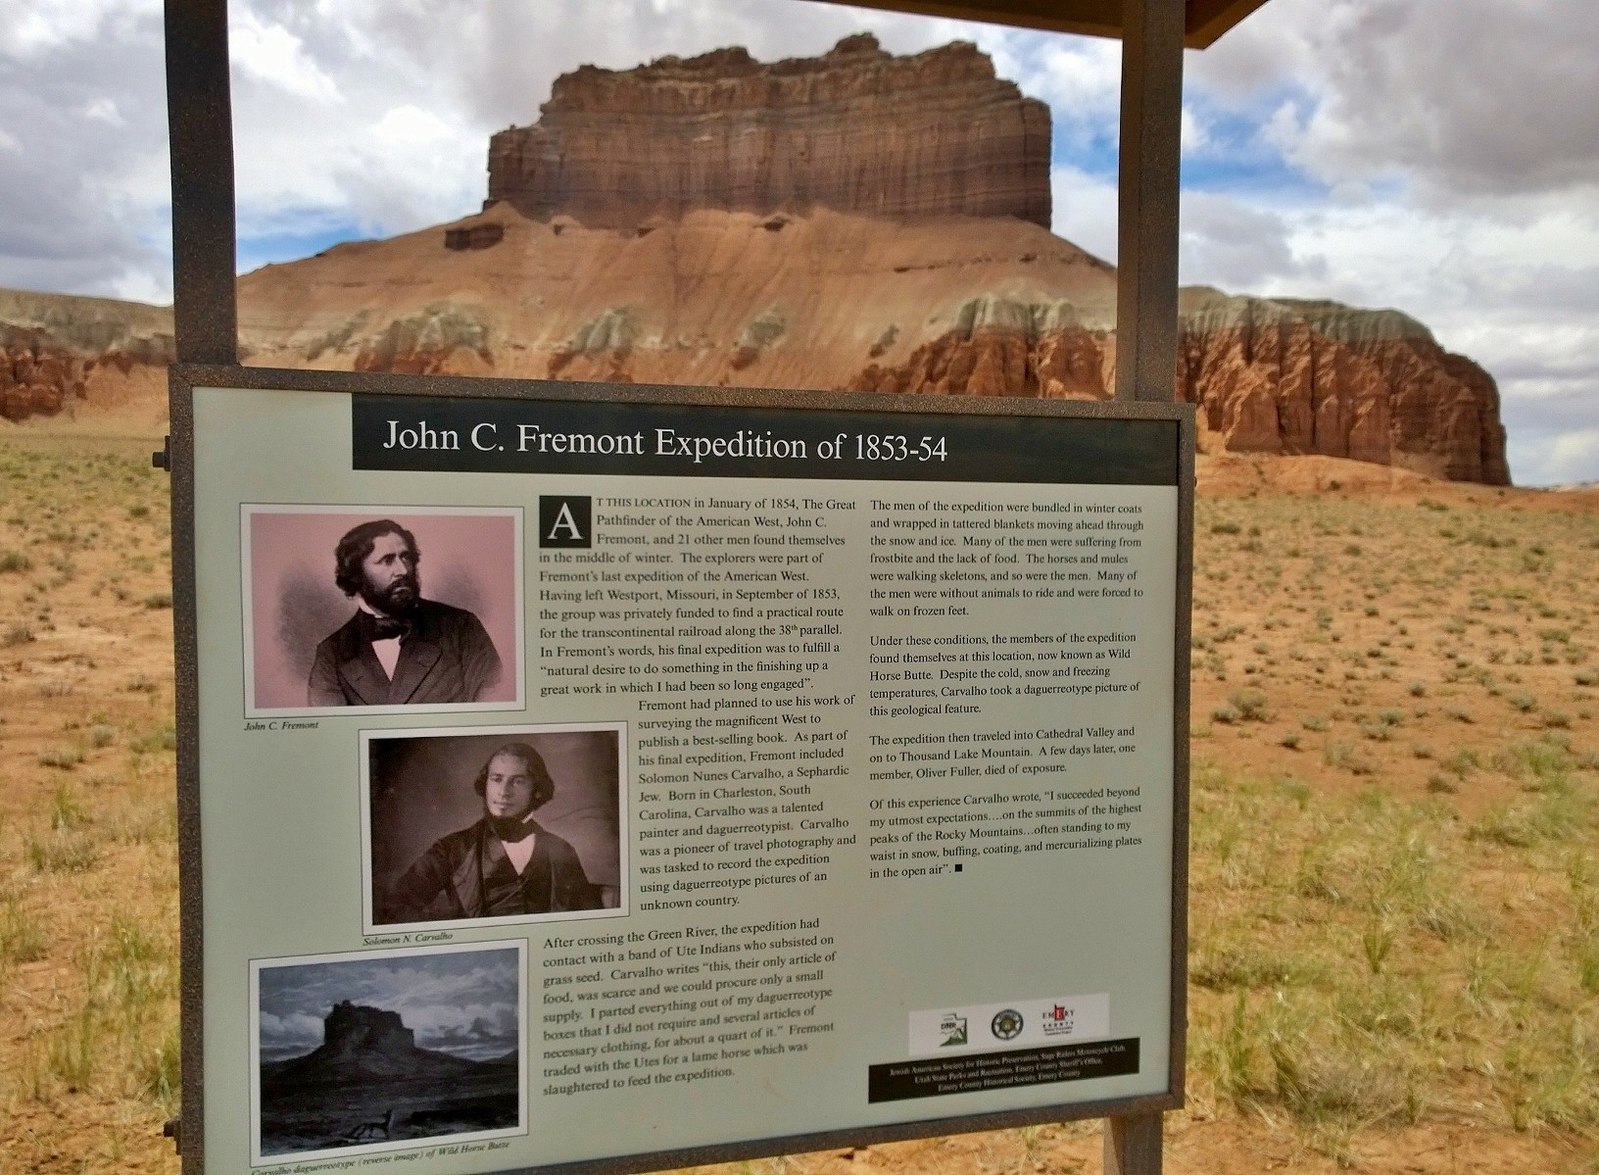 An plaque that explains the significance of the location and has a viewing window through which one can see an impressive rock formation.